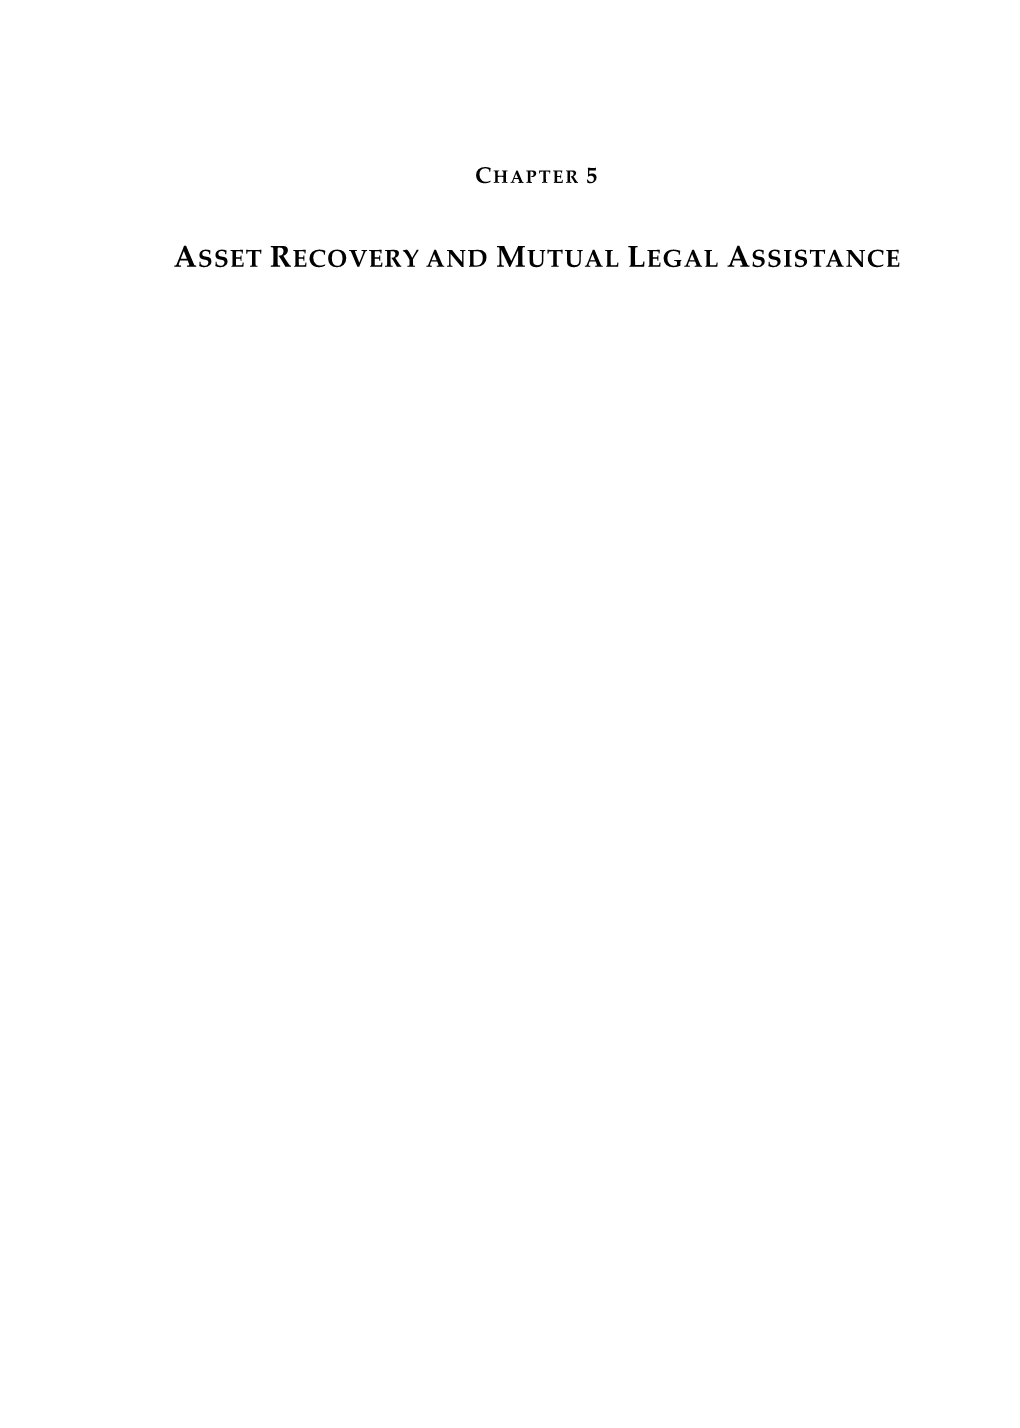 Asset Recovery and Mutual Legal Assistance Global Corruption: Law, Theory & Practice